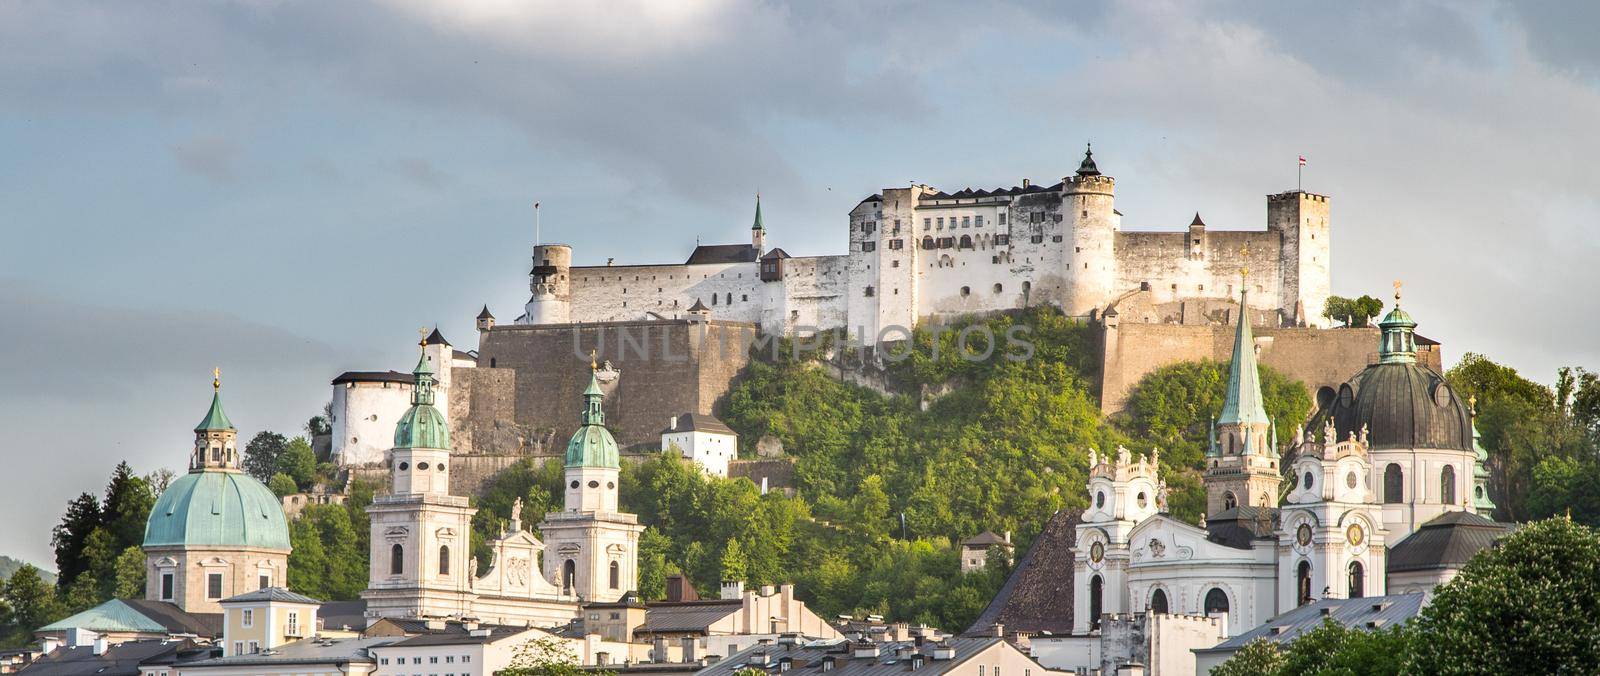 Salzburg summer time: Panoramic city landscape with Salzach with green grass and historic district by Daxenbichler